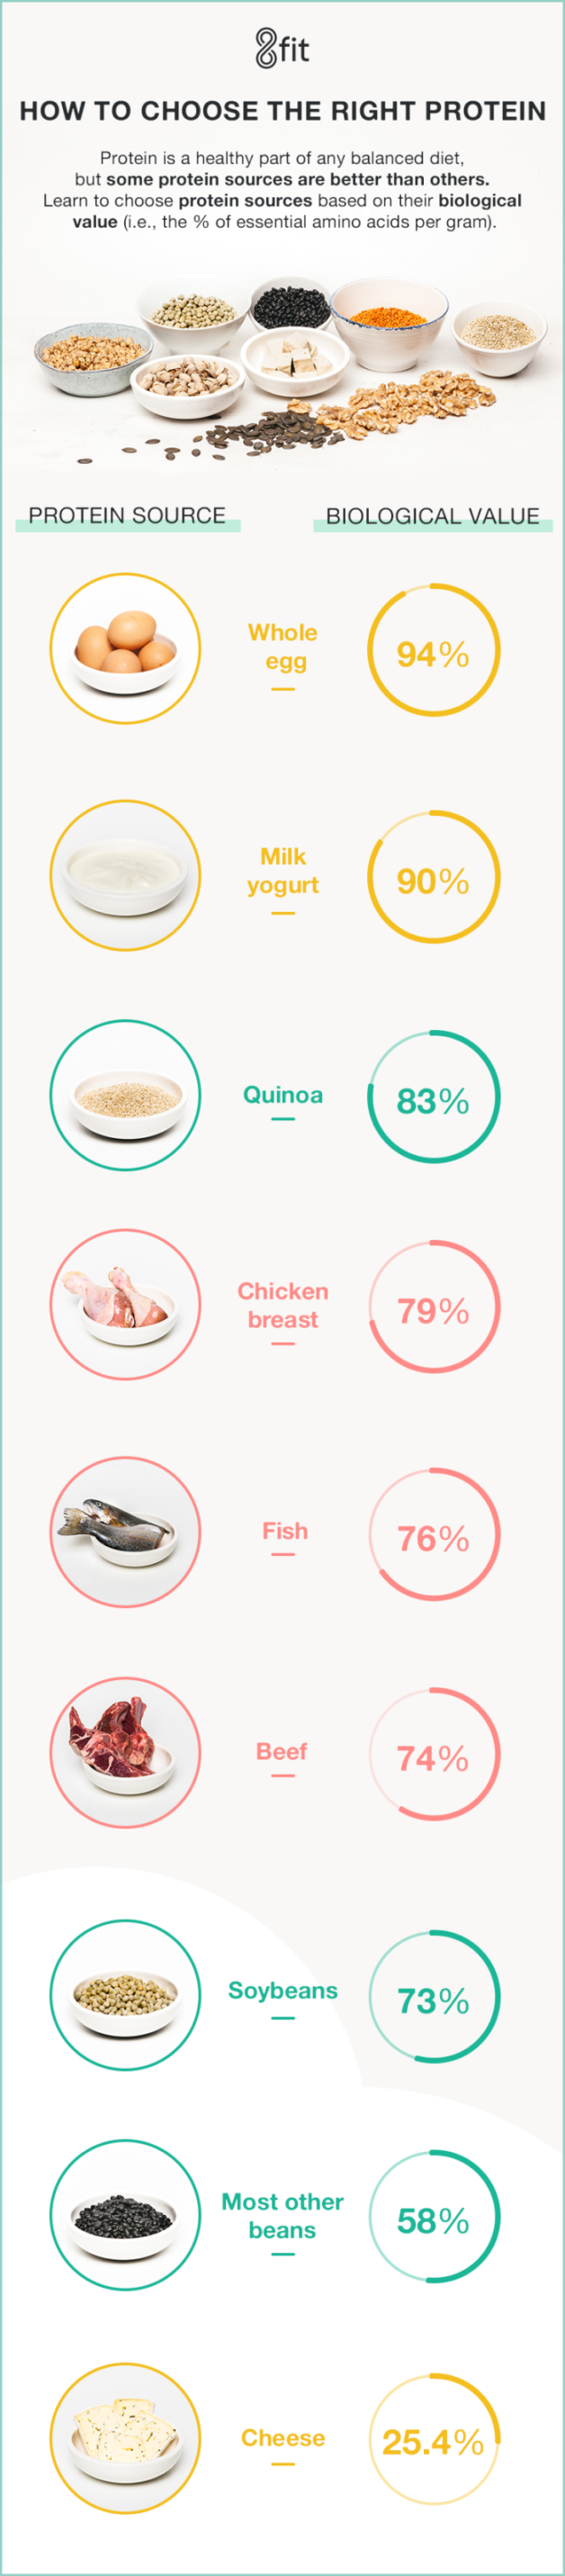 how-to-choose-your-proteins infographic protein sources